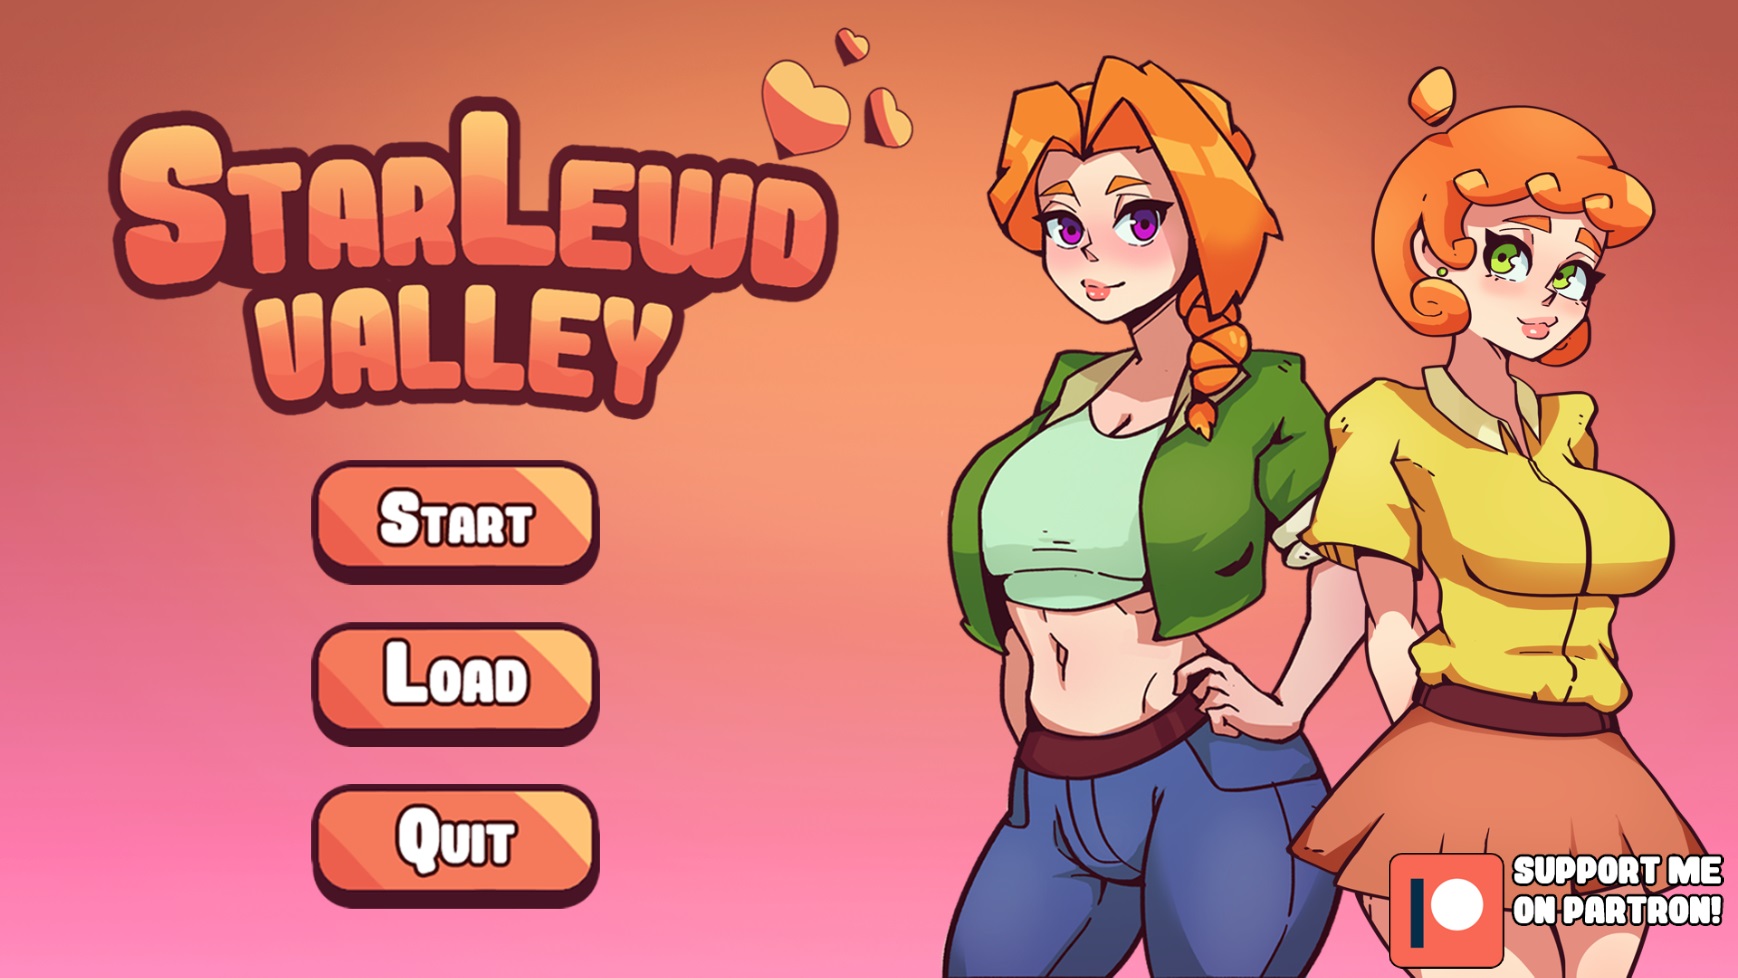 beau bostic recommends stardew valley xxx pic